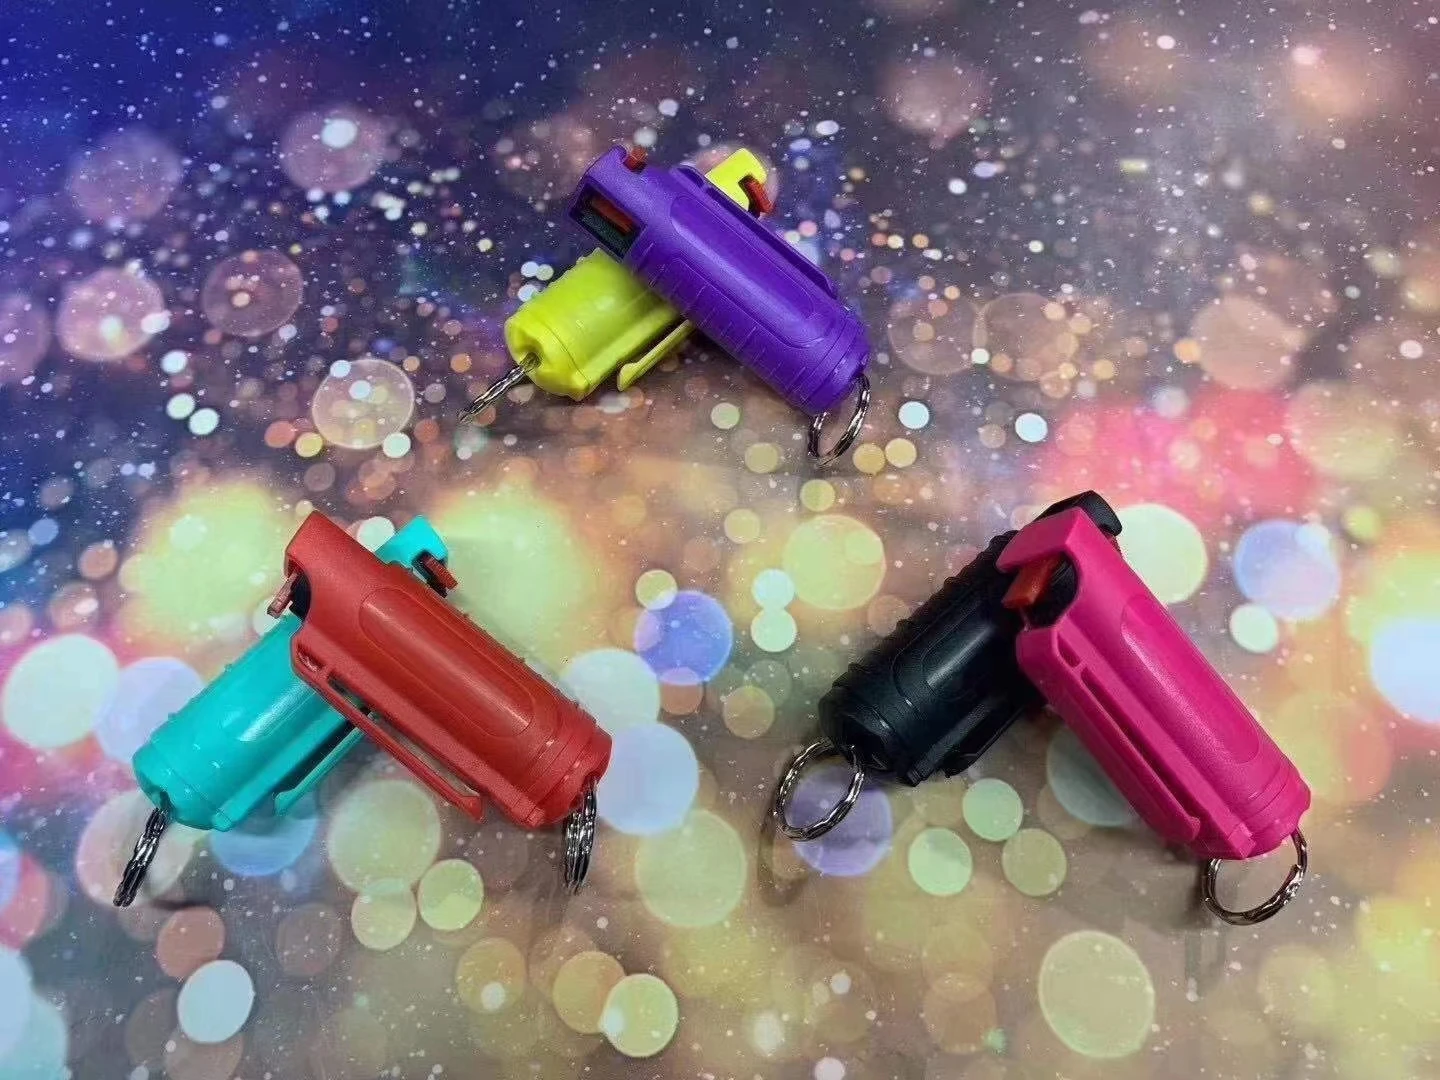 
Mini Size In stock 15ml 20ml Pepper Spray with Key chain for lady Self Defense 